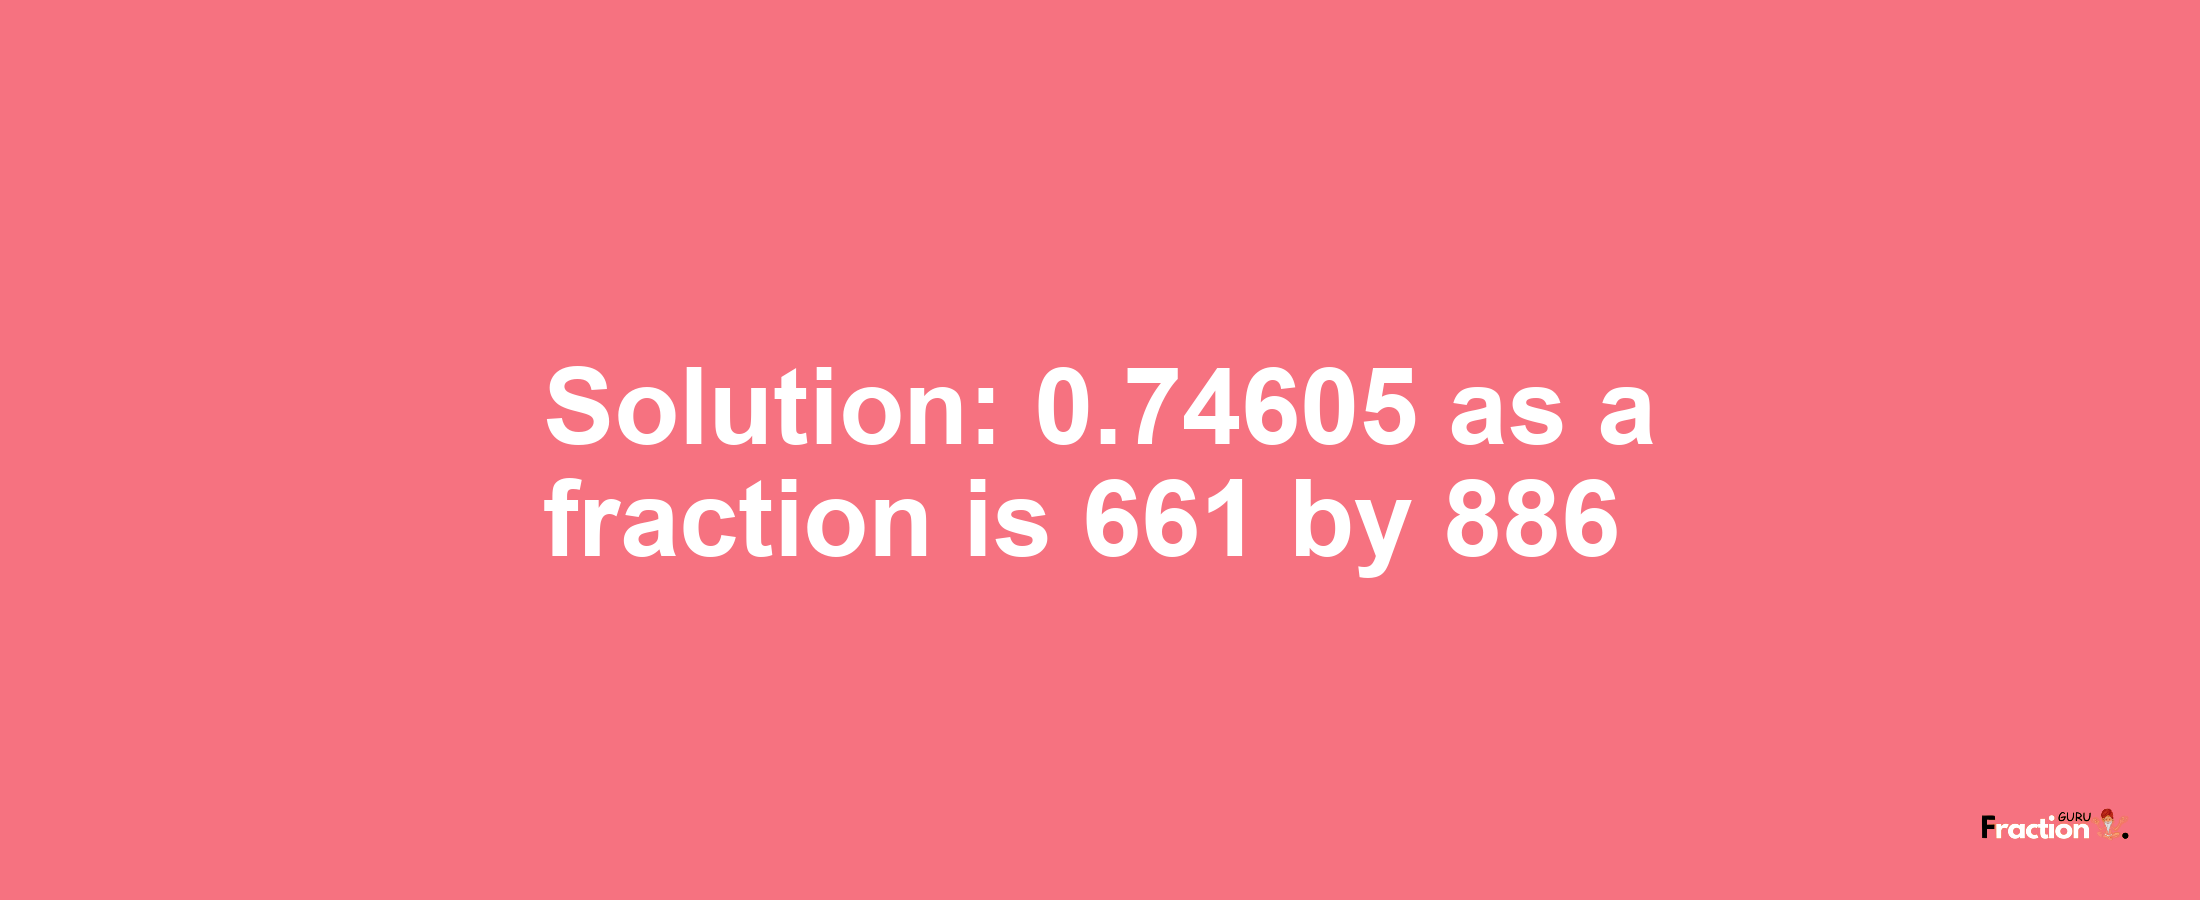 Solution:0.74605 as a fraction is 661/886